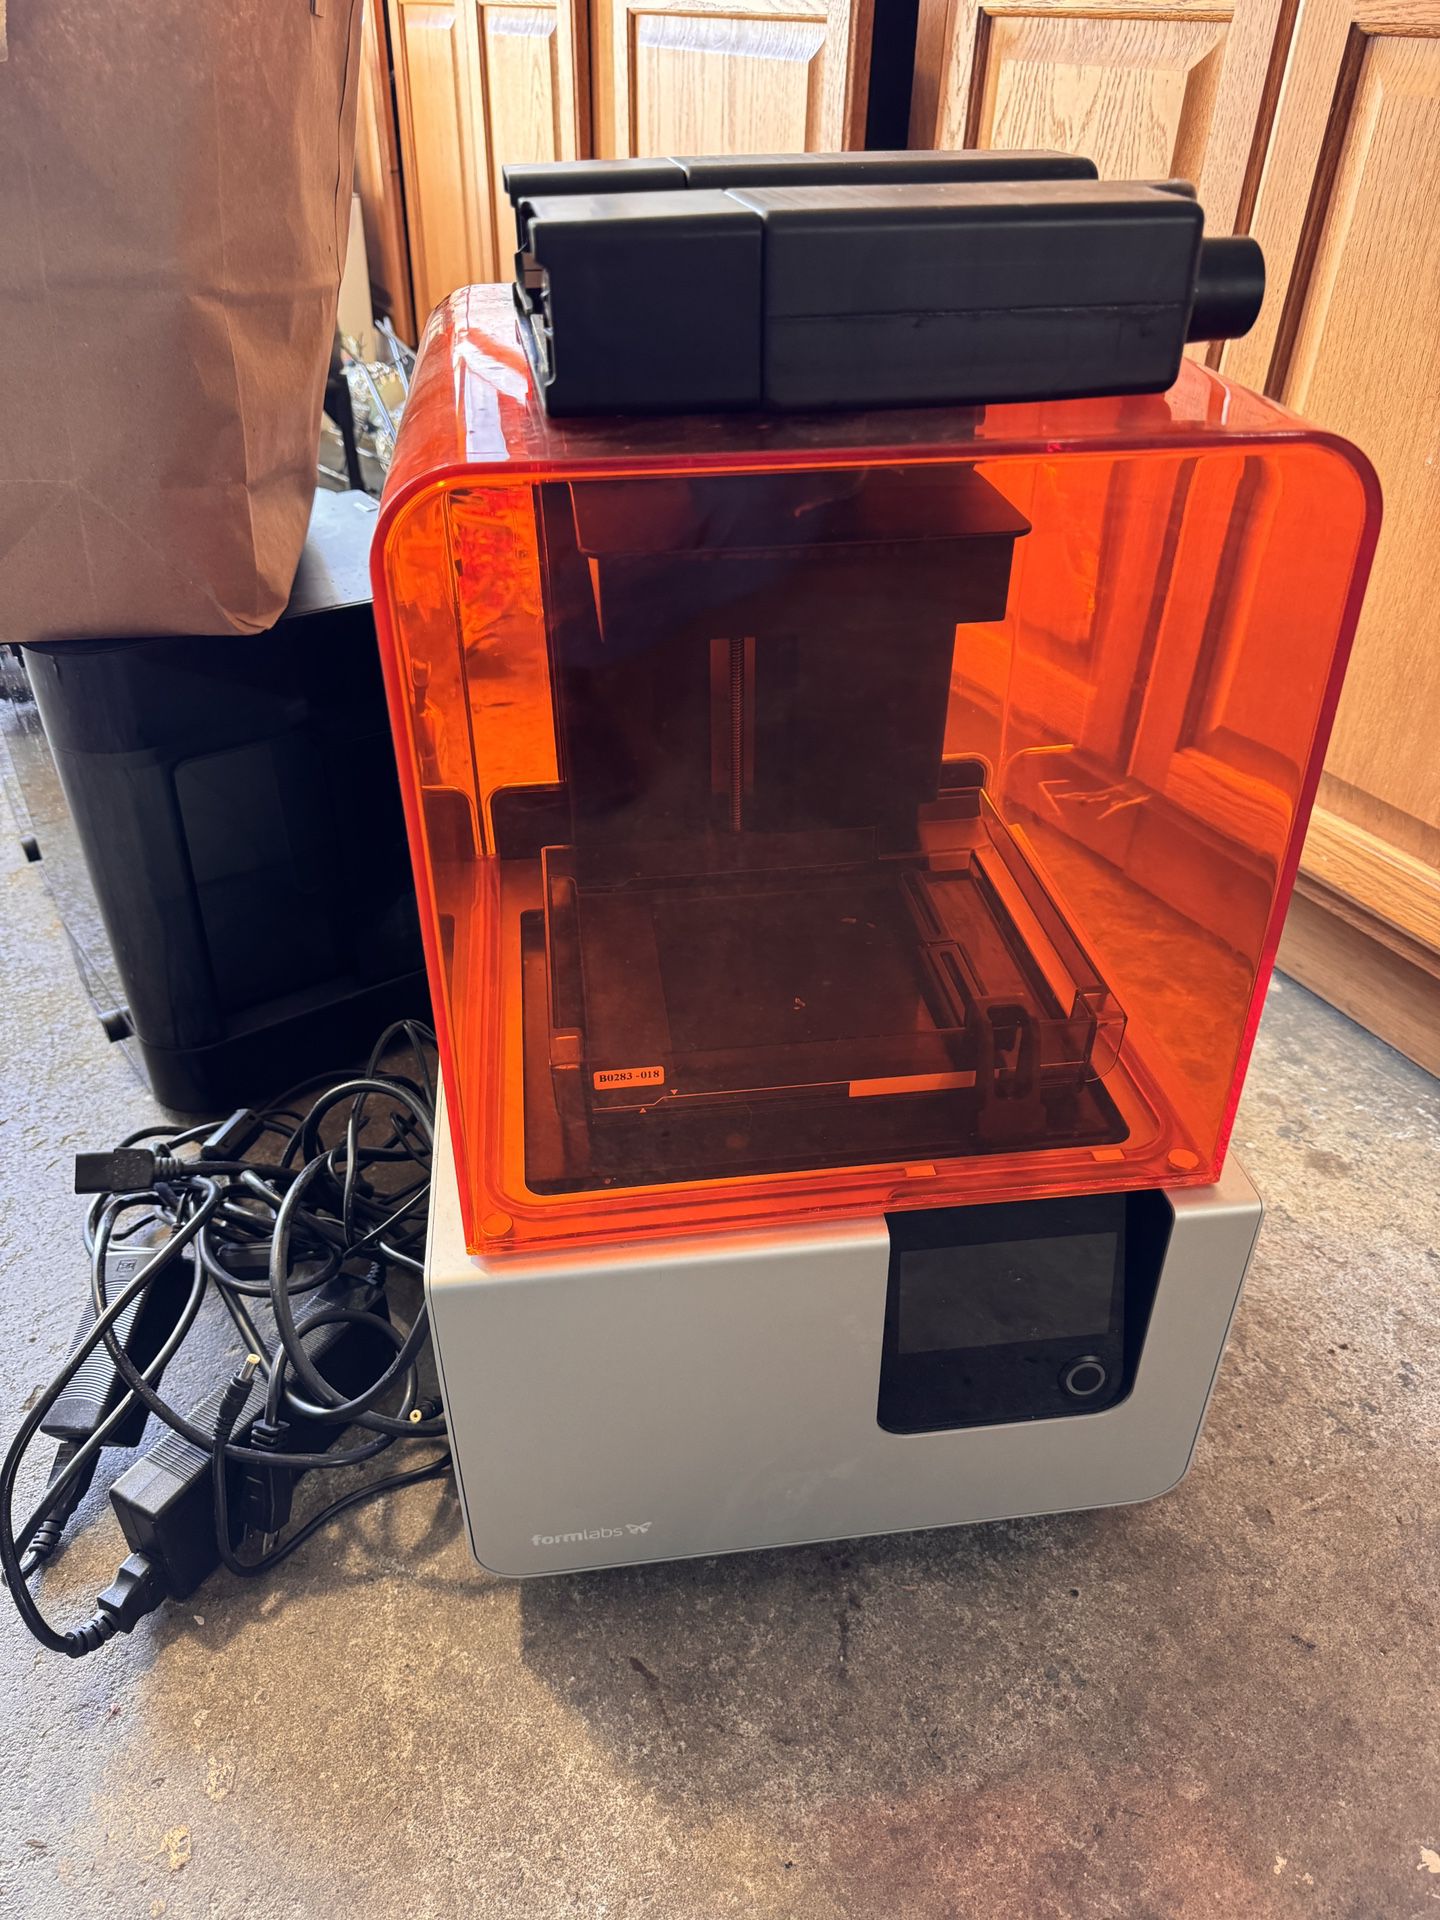 formlabs Form 2 Resin 3D Printer,  Bath, and Oven